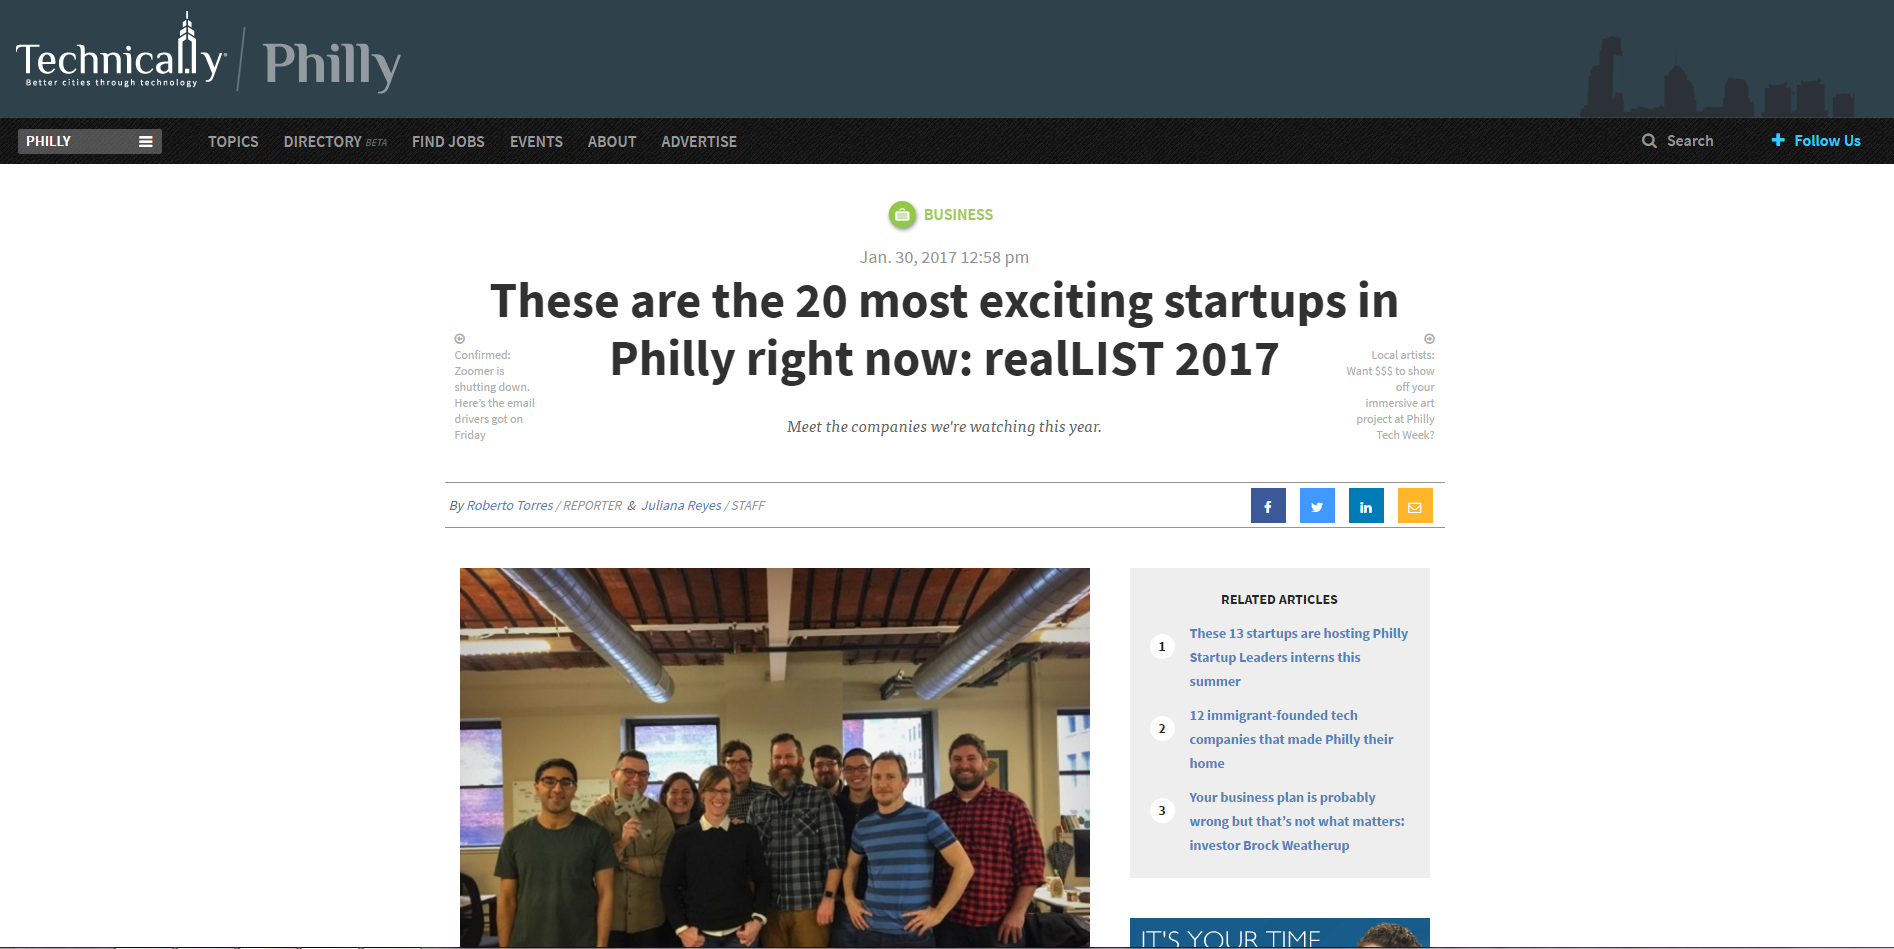 20 Most Exciting Startups in Philly header